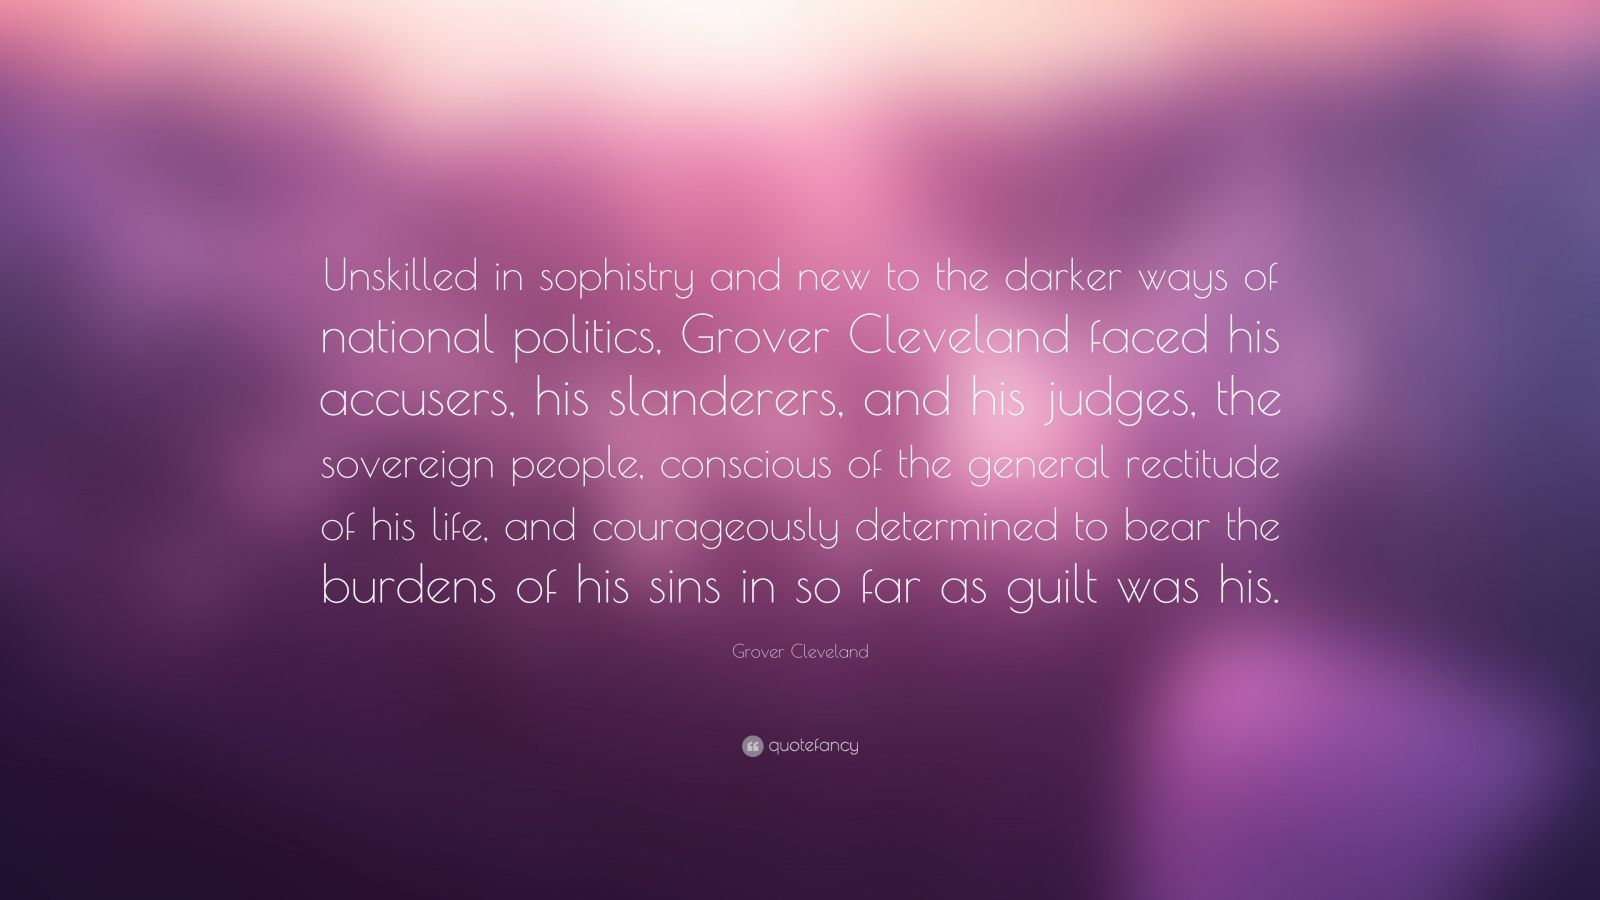 Top 70 Grover Cleveland Quotes [Page 2] | 2021 Edition | Free Images